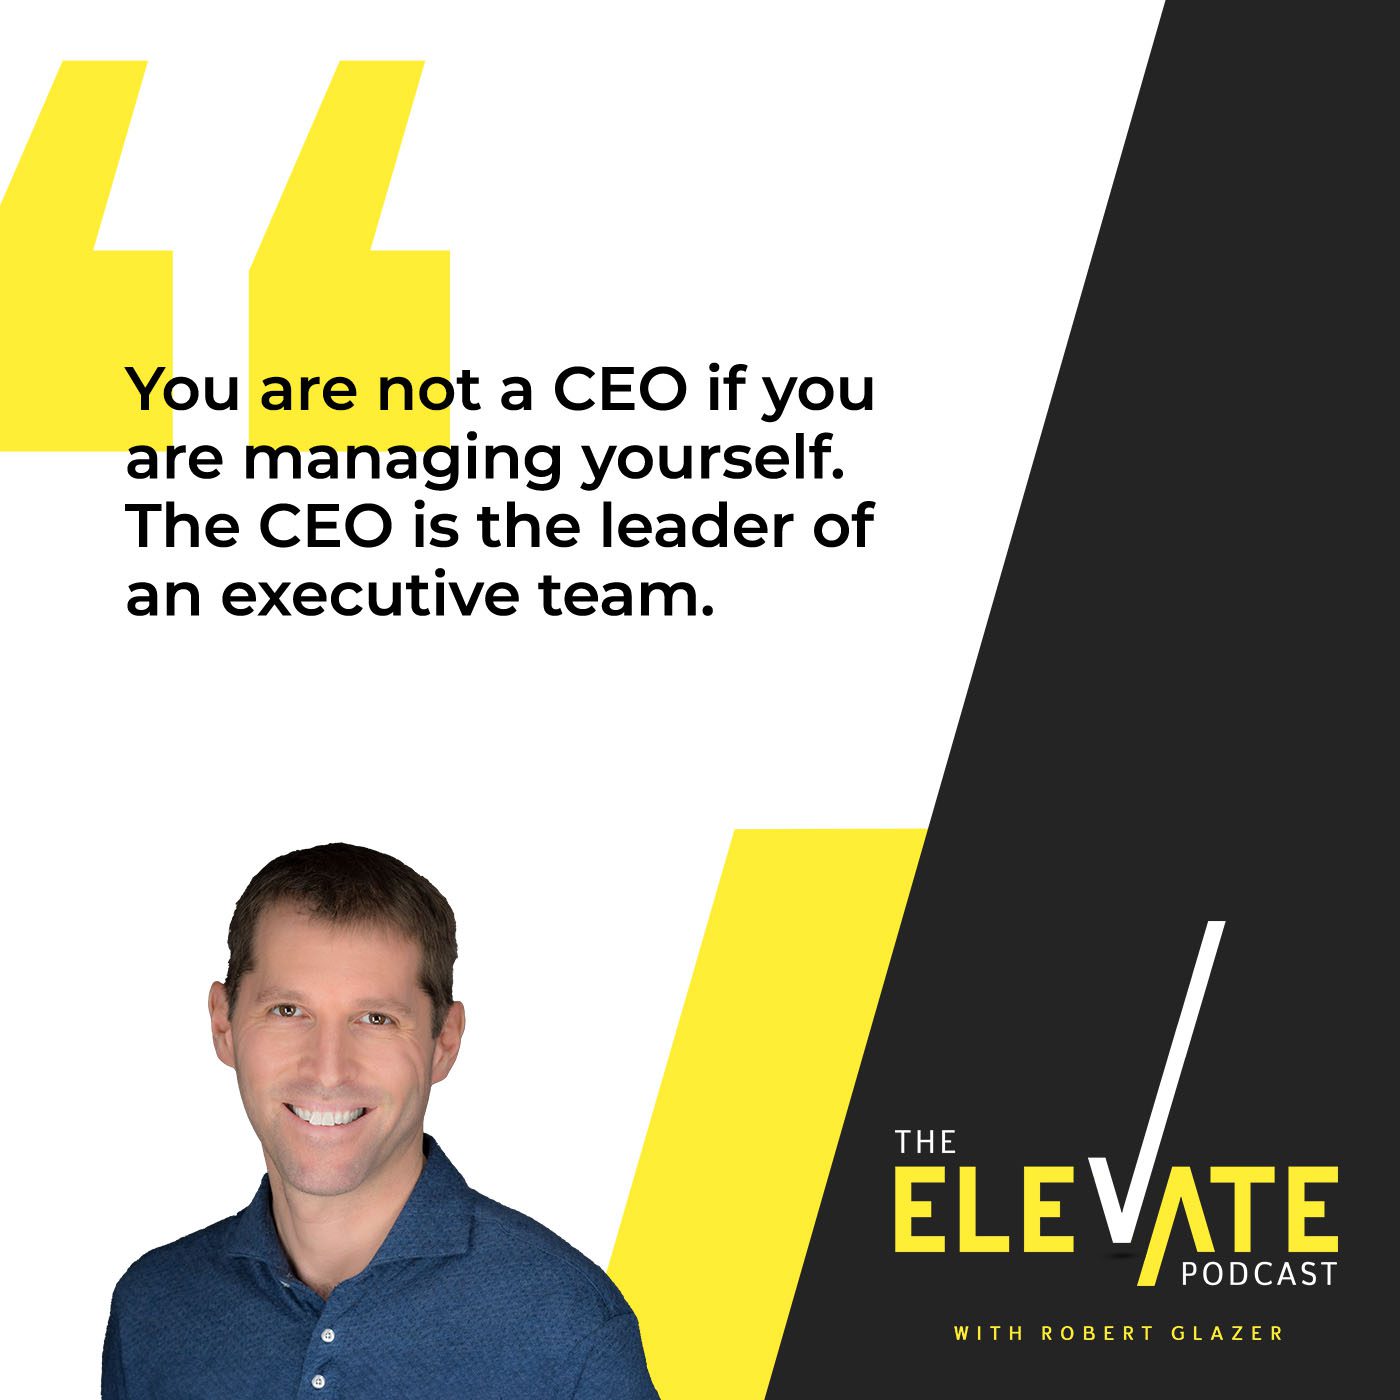 The Elevate Podcast with Robert Glazer | Michael Watkins | Leadership Transitions